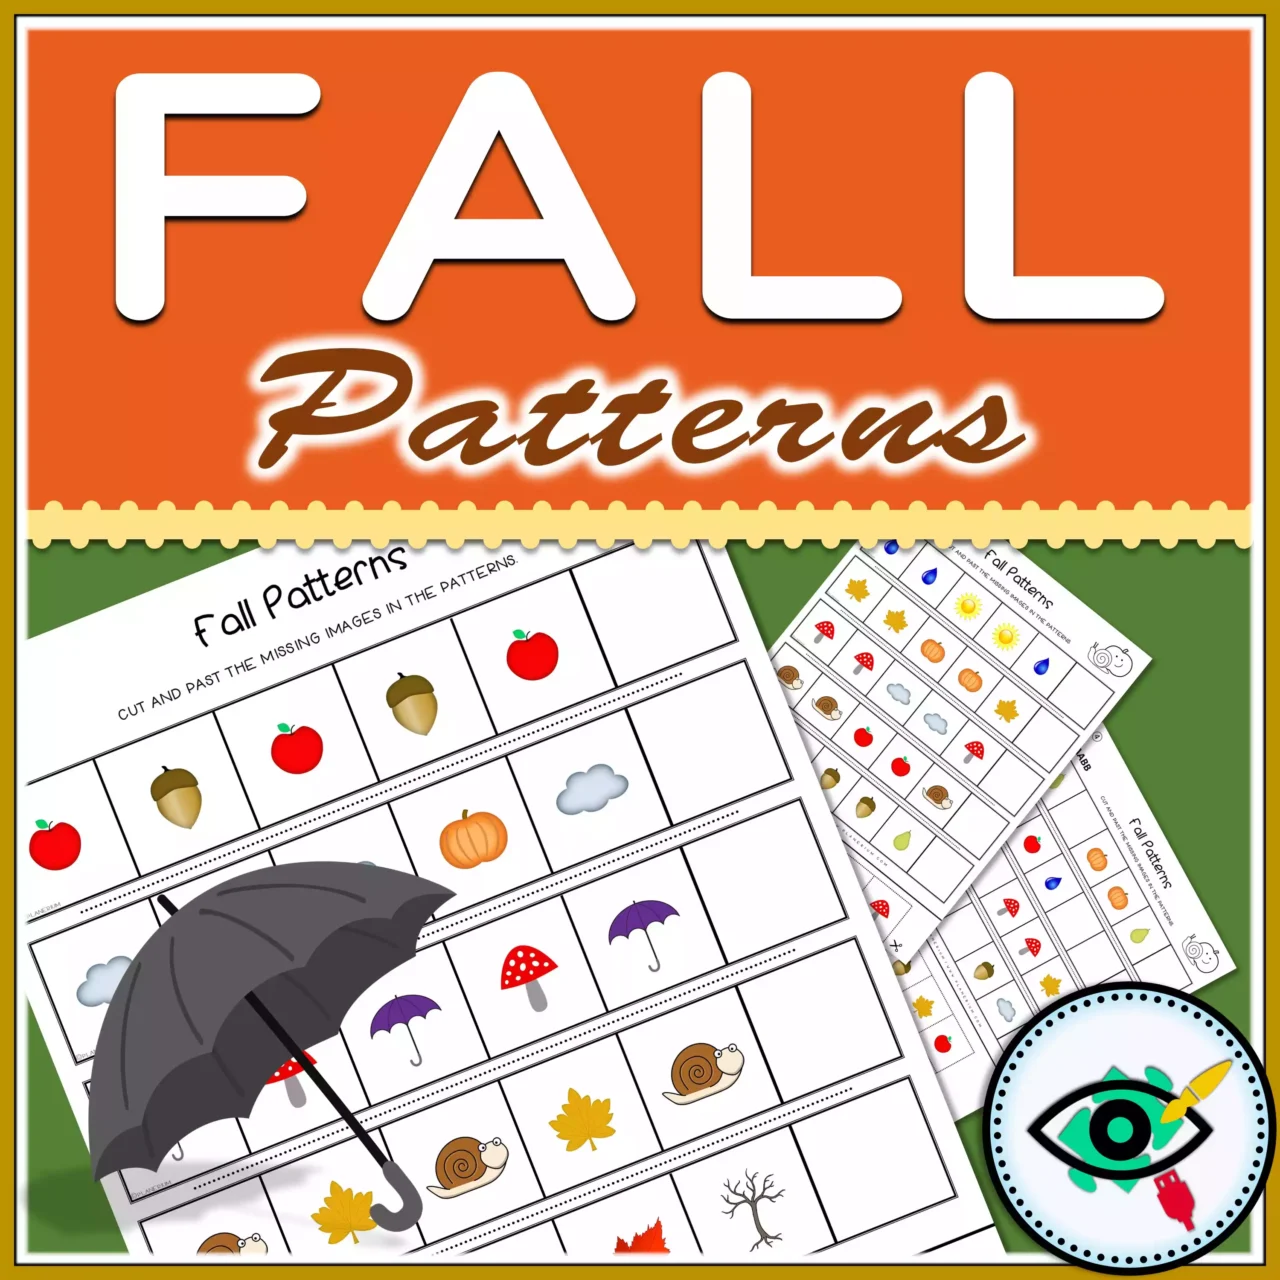 Fall - Patterns Activity - Image Title